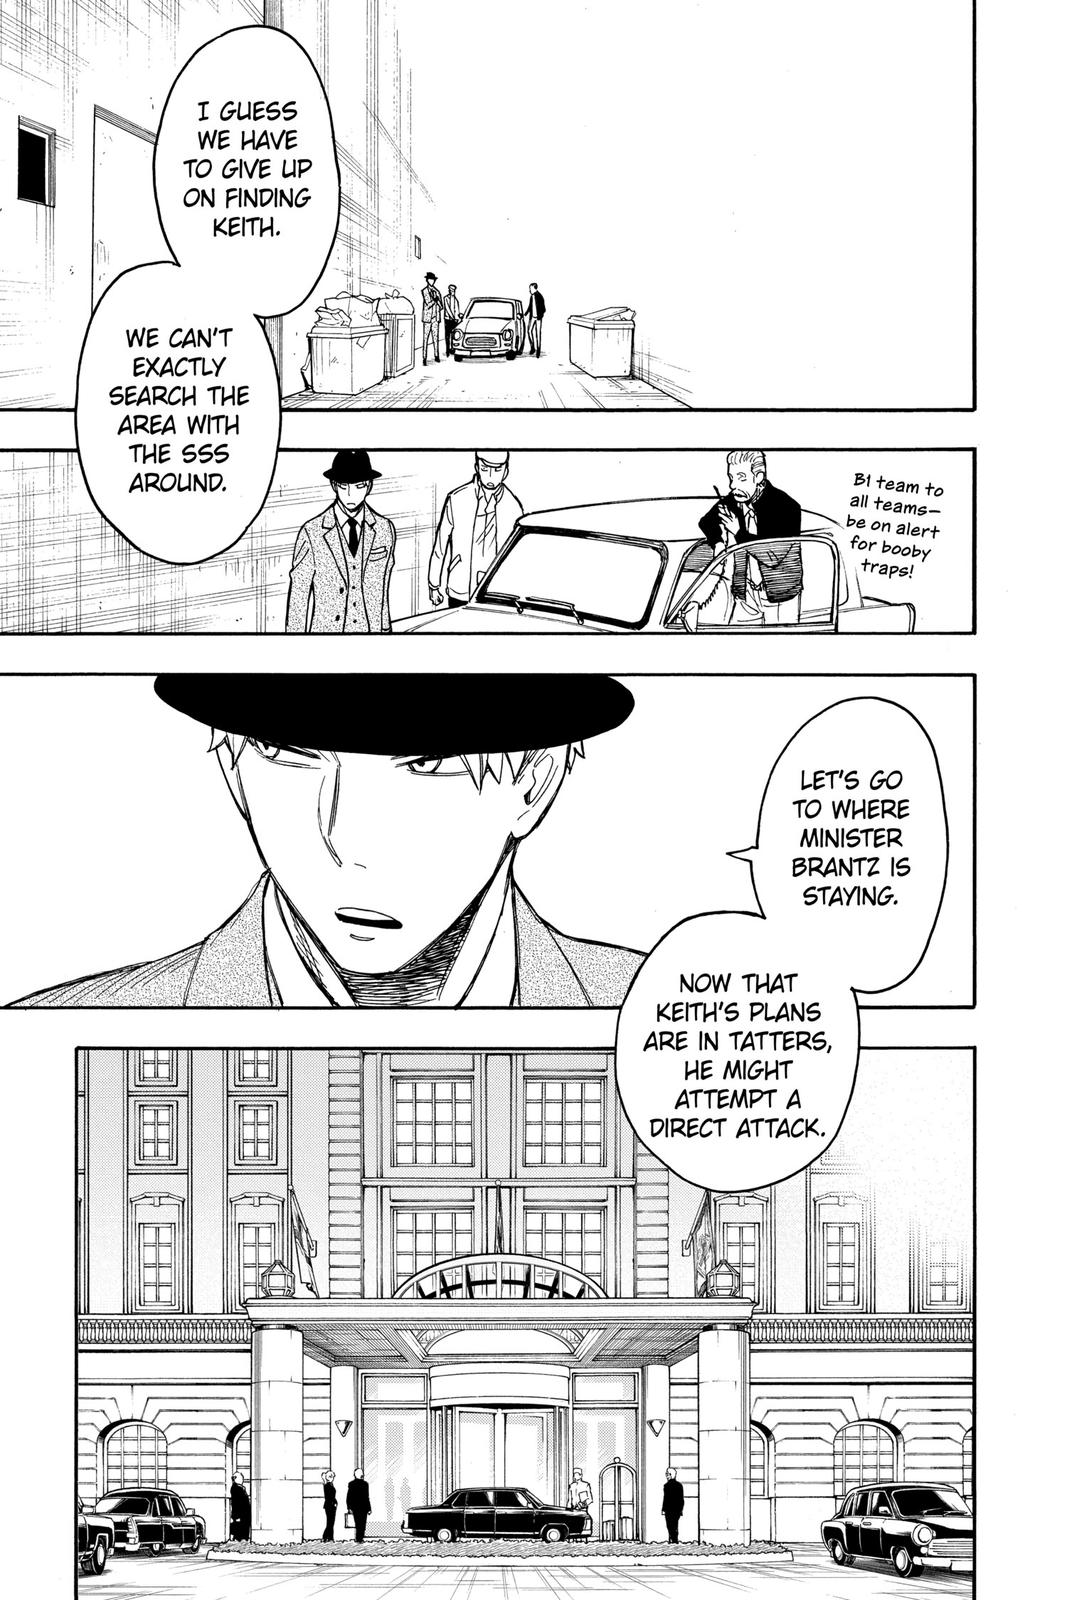 Spy x Family, Chapter 21 image 017